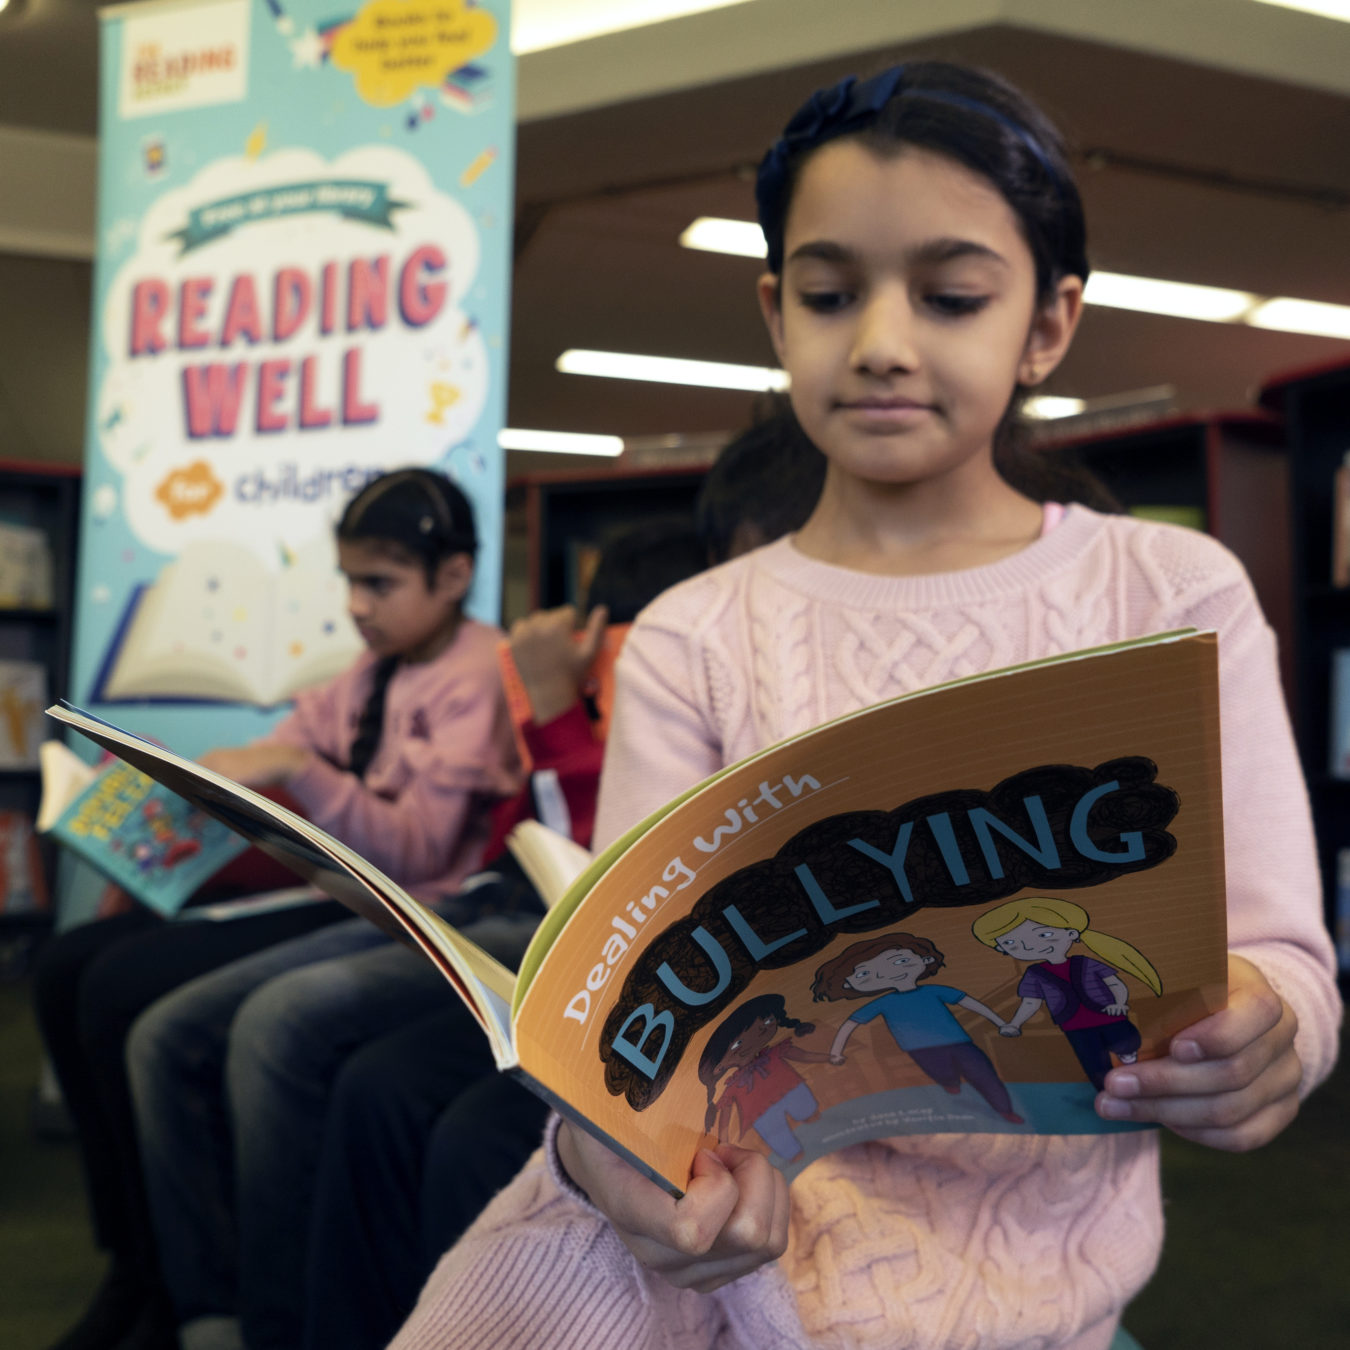 A group of children reading in a library. The girl in the foreground has dark hair and a pink jumper and is reading a book called Dealing with Bullying.